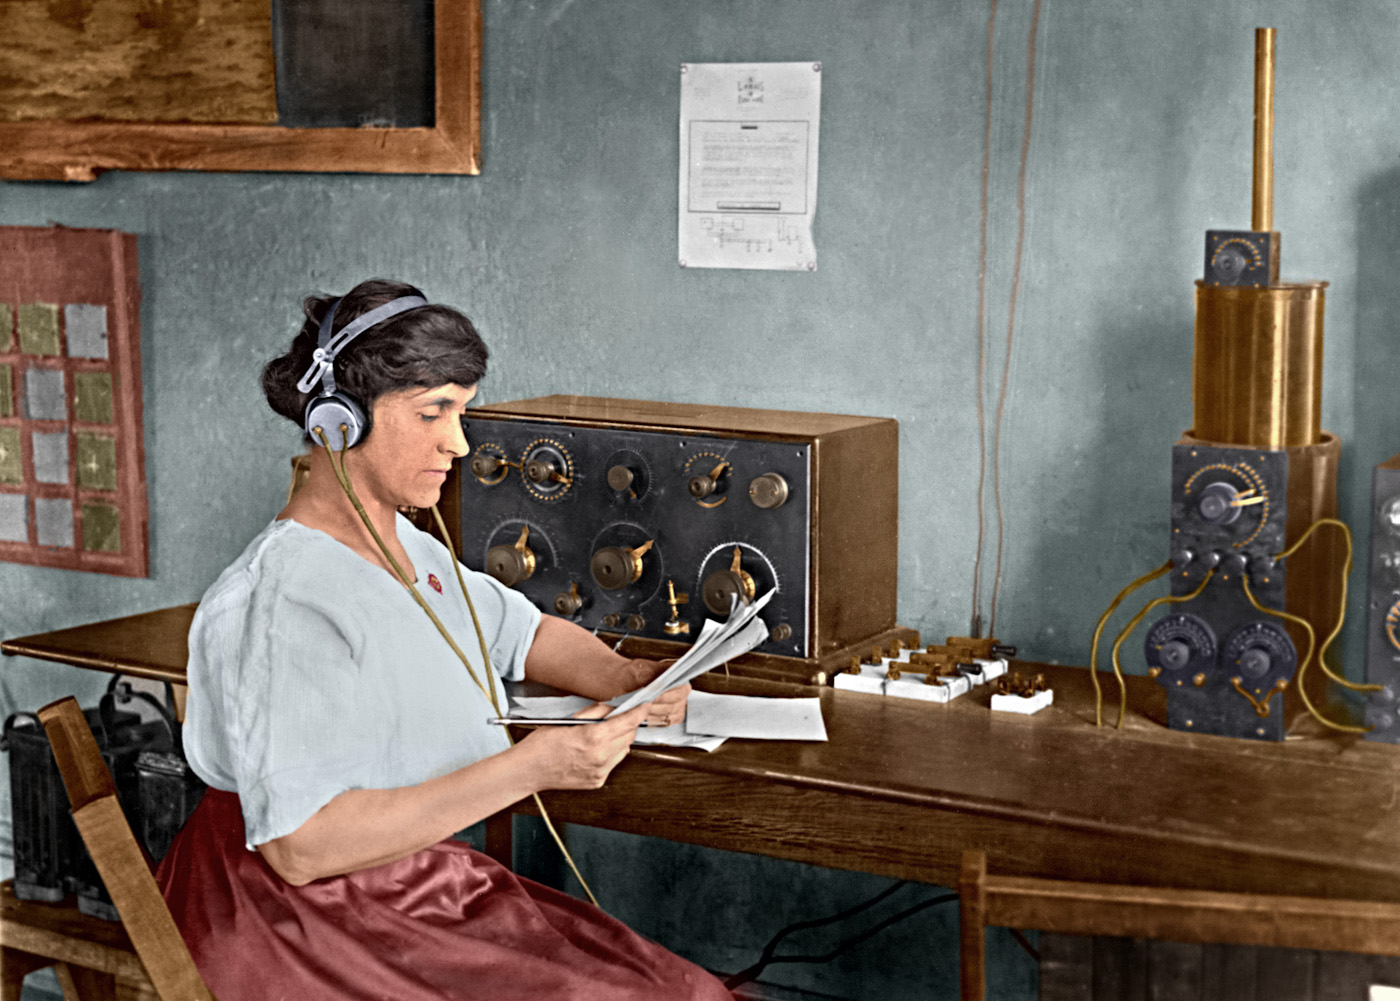 This colorized image shows Mary Texanna Loomis, the first woman in the U.S. to run a radio school, operating her radio station in 1921. Her school, the Loomis Radio College, operated in Washington, D.C., in the 1920's and 1930's.  She is seated at an early receiver that uses a panel mounted crystal detector.  The knife switches to the right are probably antenna selectors.  Next to that is an antenna tuner called a "loose coupler", which is connected to a tube receiver out of view on the right.  

I optimized the image in Photoshop and colorized it using AKVIS Coloriage software.  The original black and white photo is in the Library of Congress collection and can be seen at http://www.loc.gov/pictures/item/97504677/. View full size.